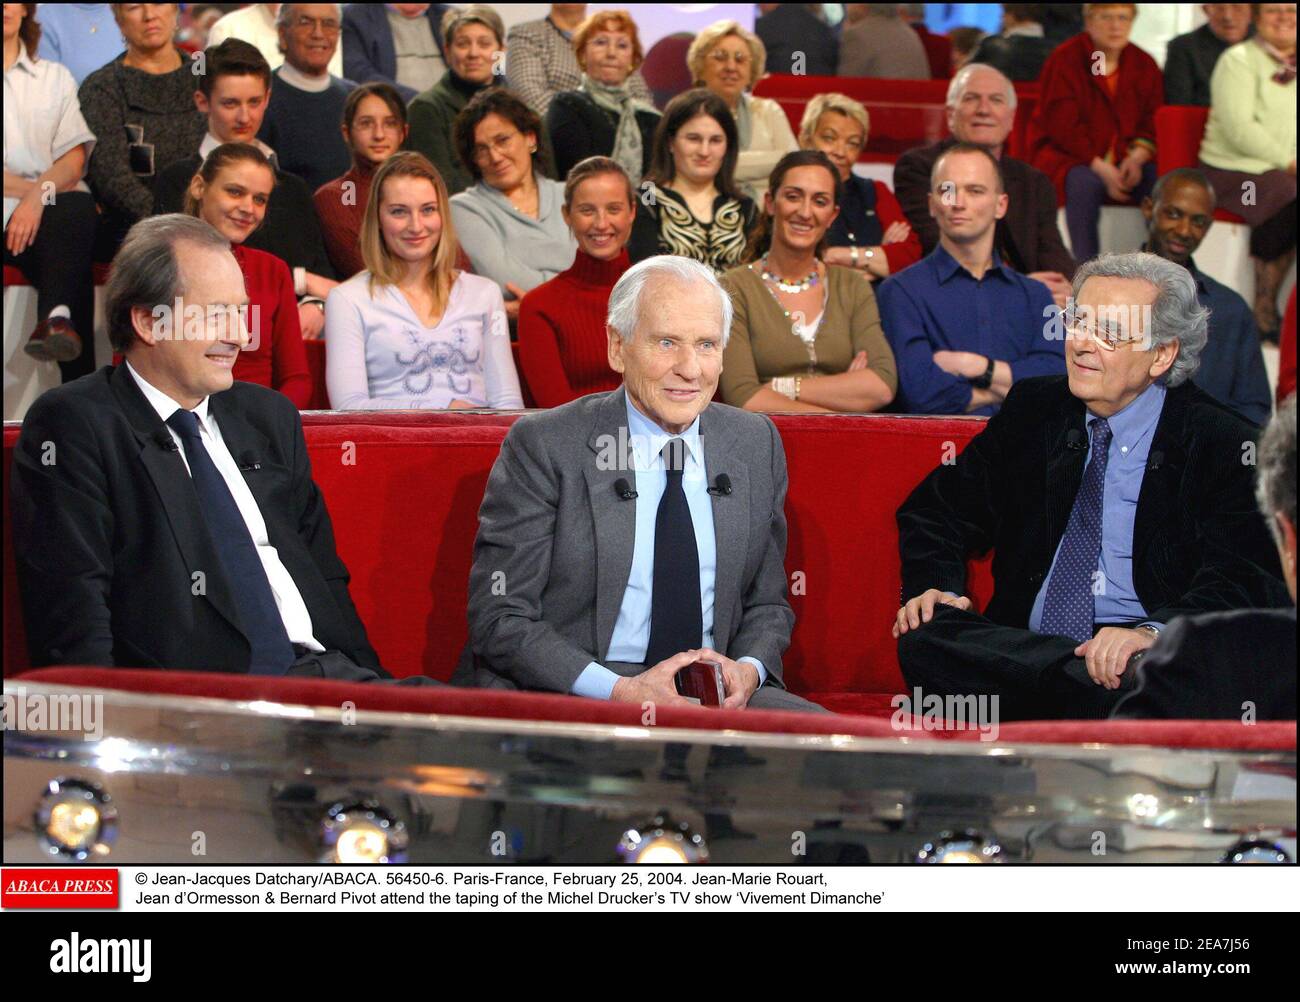 © Jean-Jacques Datchary/ABACA. 56450-6. Paris-France, February 25, 2004. Jean-Marie Rouart, Jean d'Ormesson & Bernard Pivot attend the taping of the Michel Drucker's TV show ïVivement Dimanche' Stock Photo